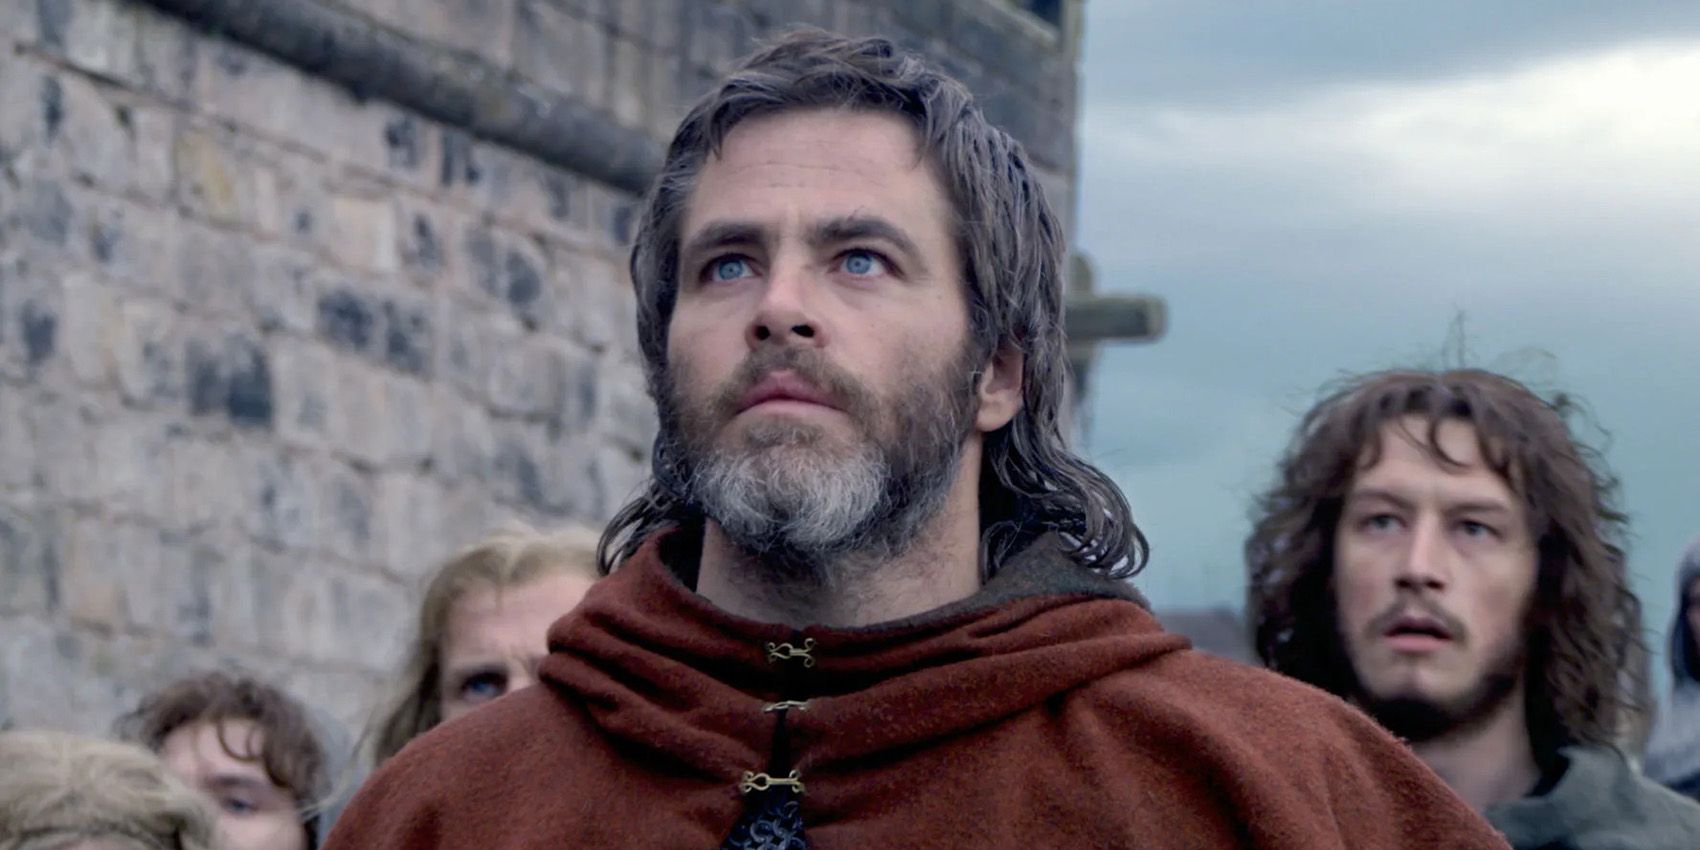 Robert the Brice standing by a castle in Outlaw King.